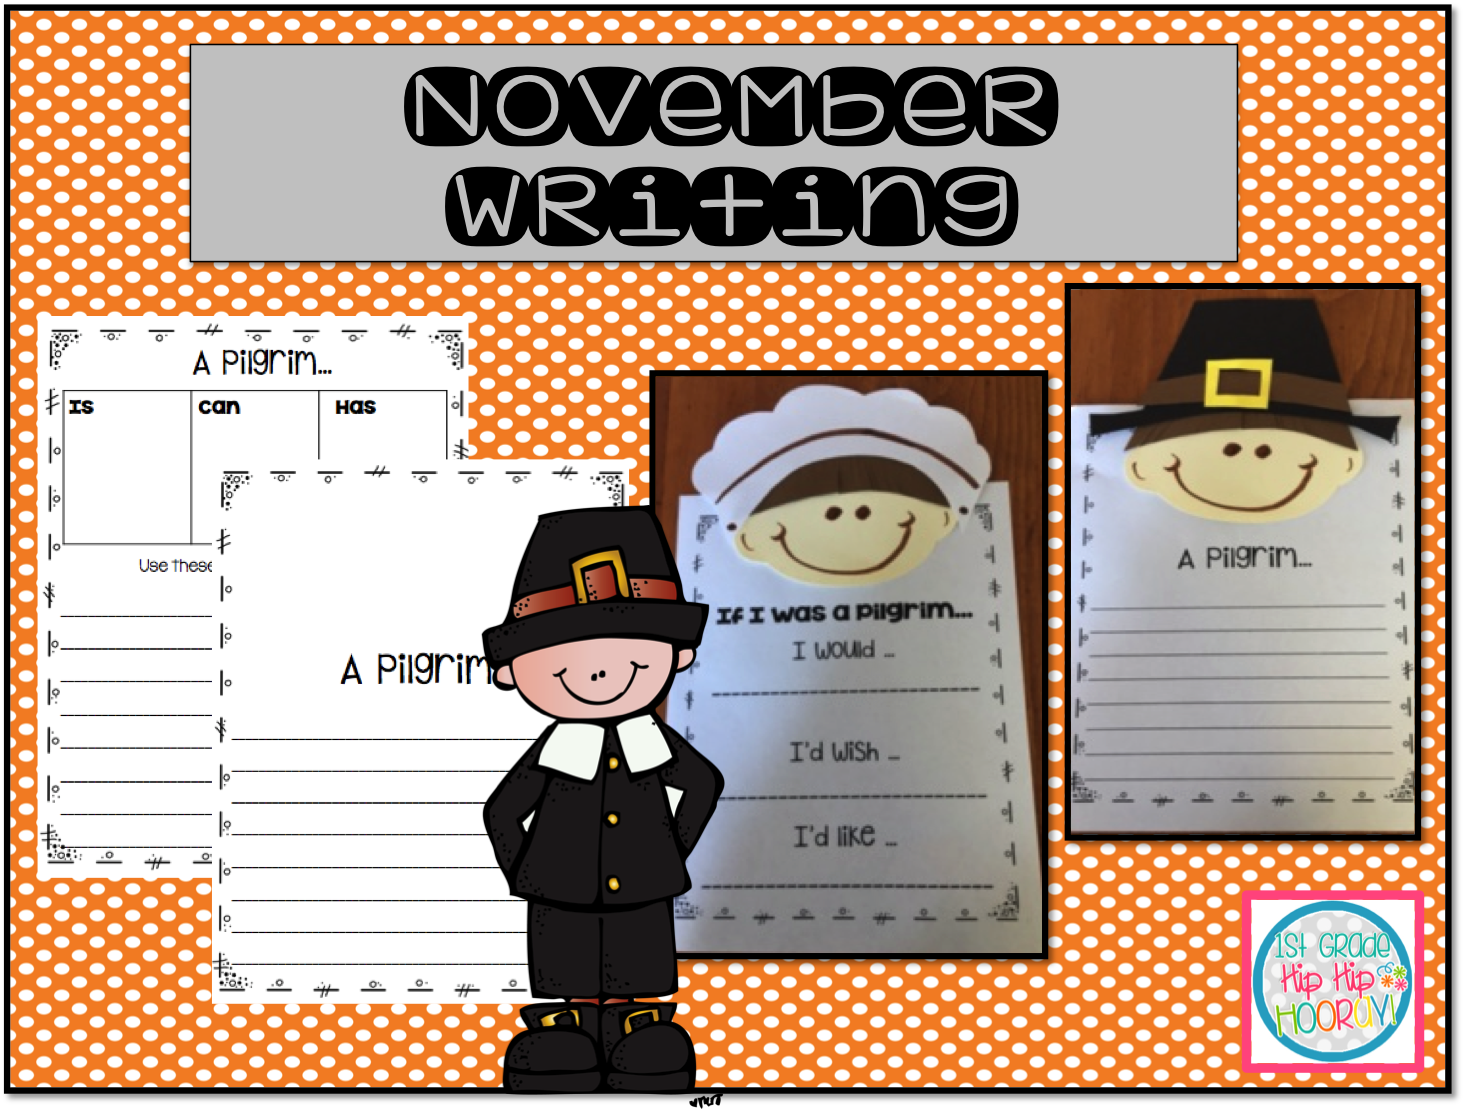 1st Grade Hip Hip Hooray!: November Writing with Page Toppers!